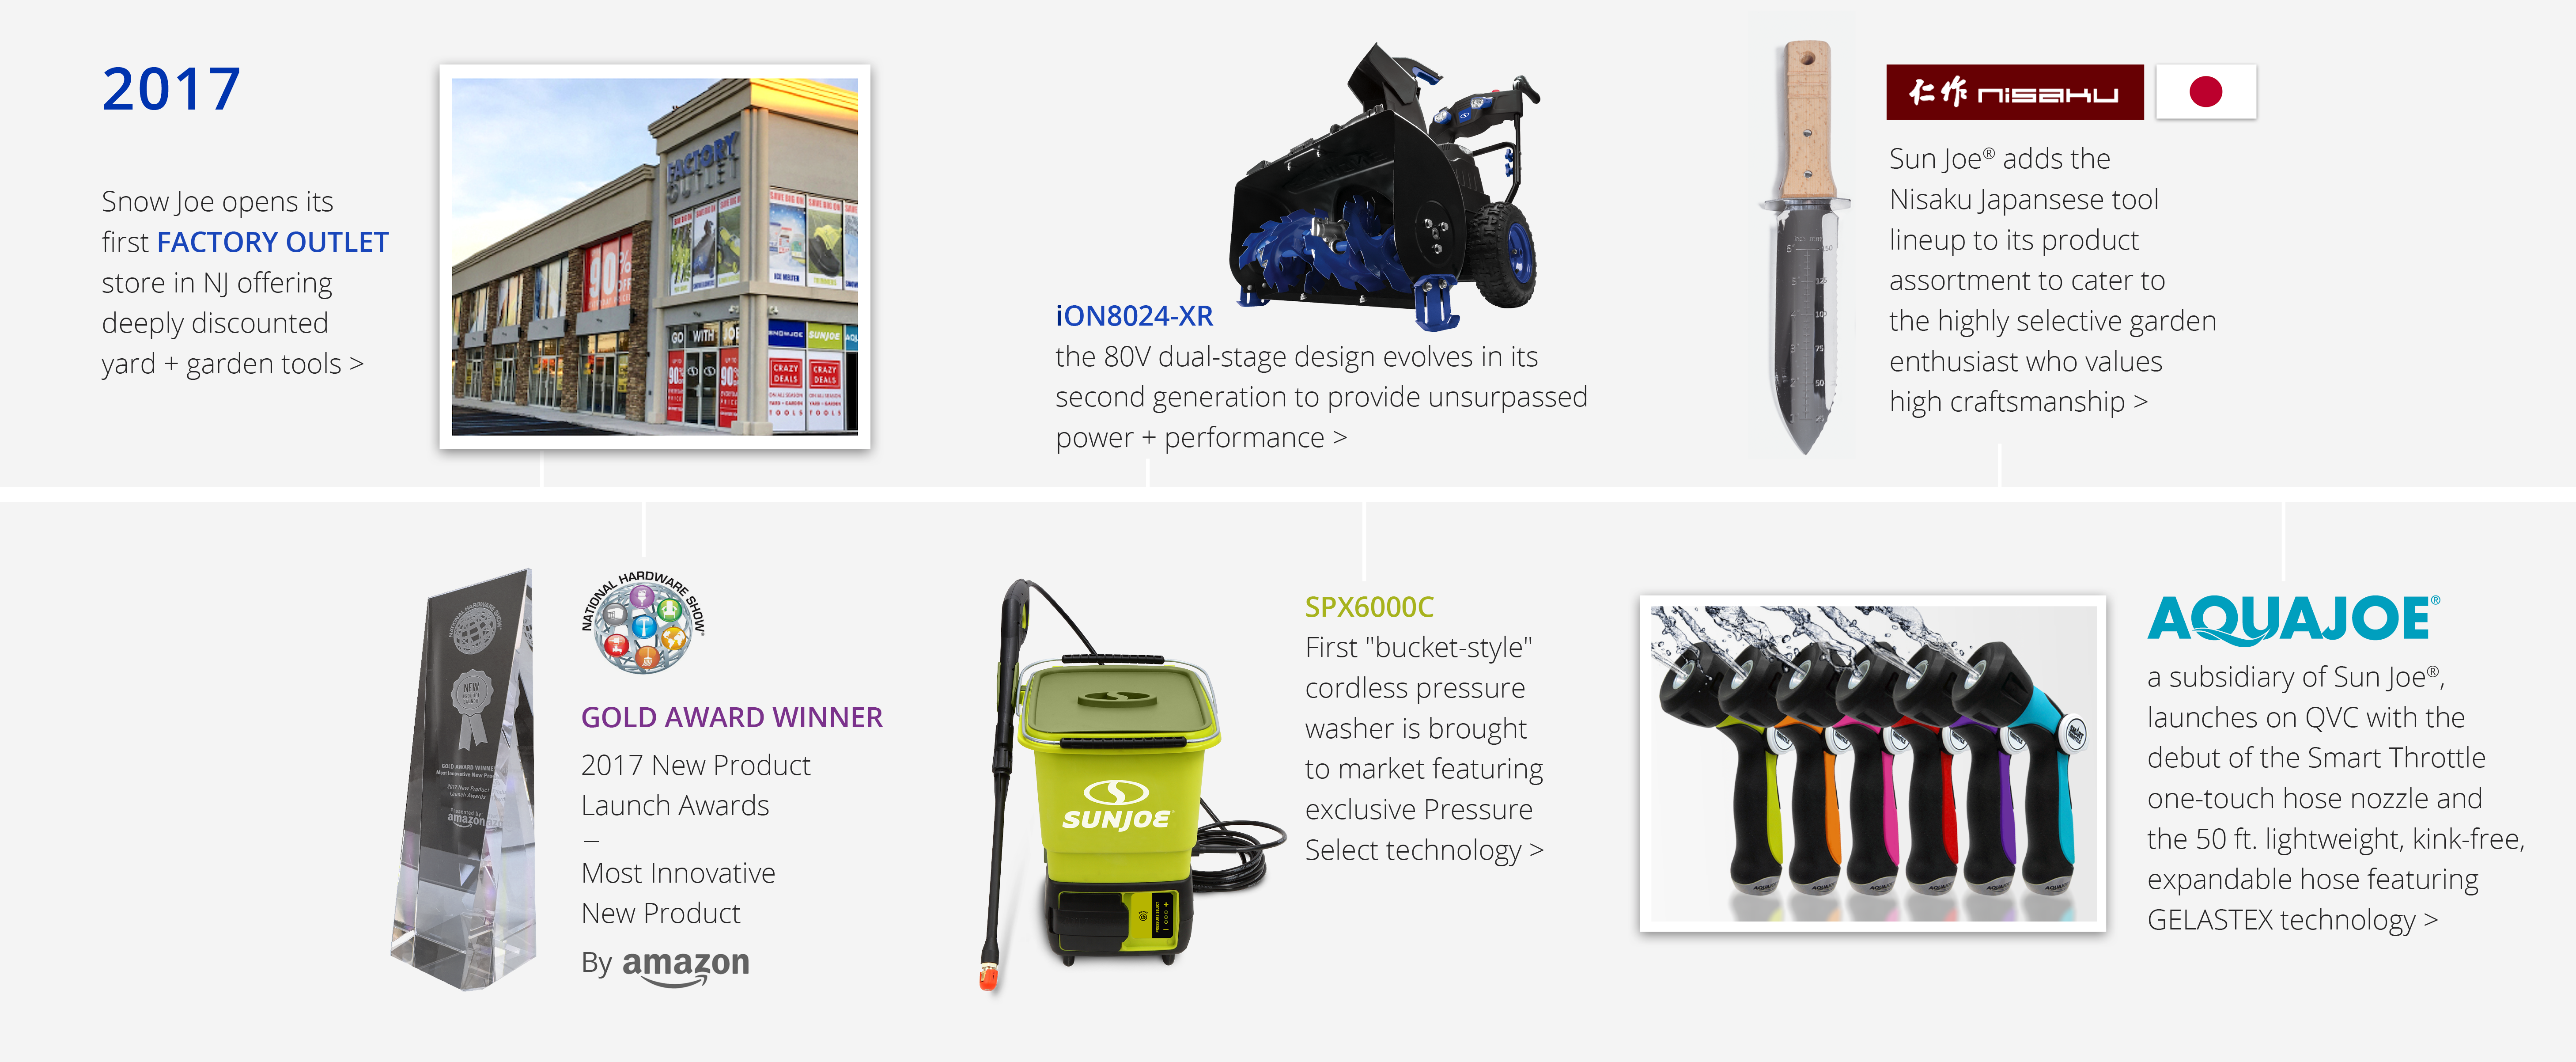 2017 timeline for Snow Joe: opened the Factory Outlet sotre, the 80-volt Snow Blower evolves, Sun Joe adds the Nisaku Japanese tool lineup to its cataog, won the gold award for most innovative new product, the first bucket-style cordless pressure washer is brought to market, and Aqua Joe launches on QVC.